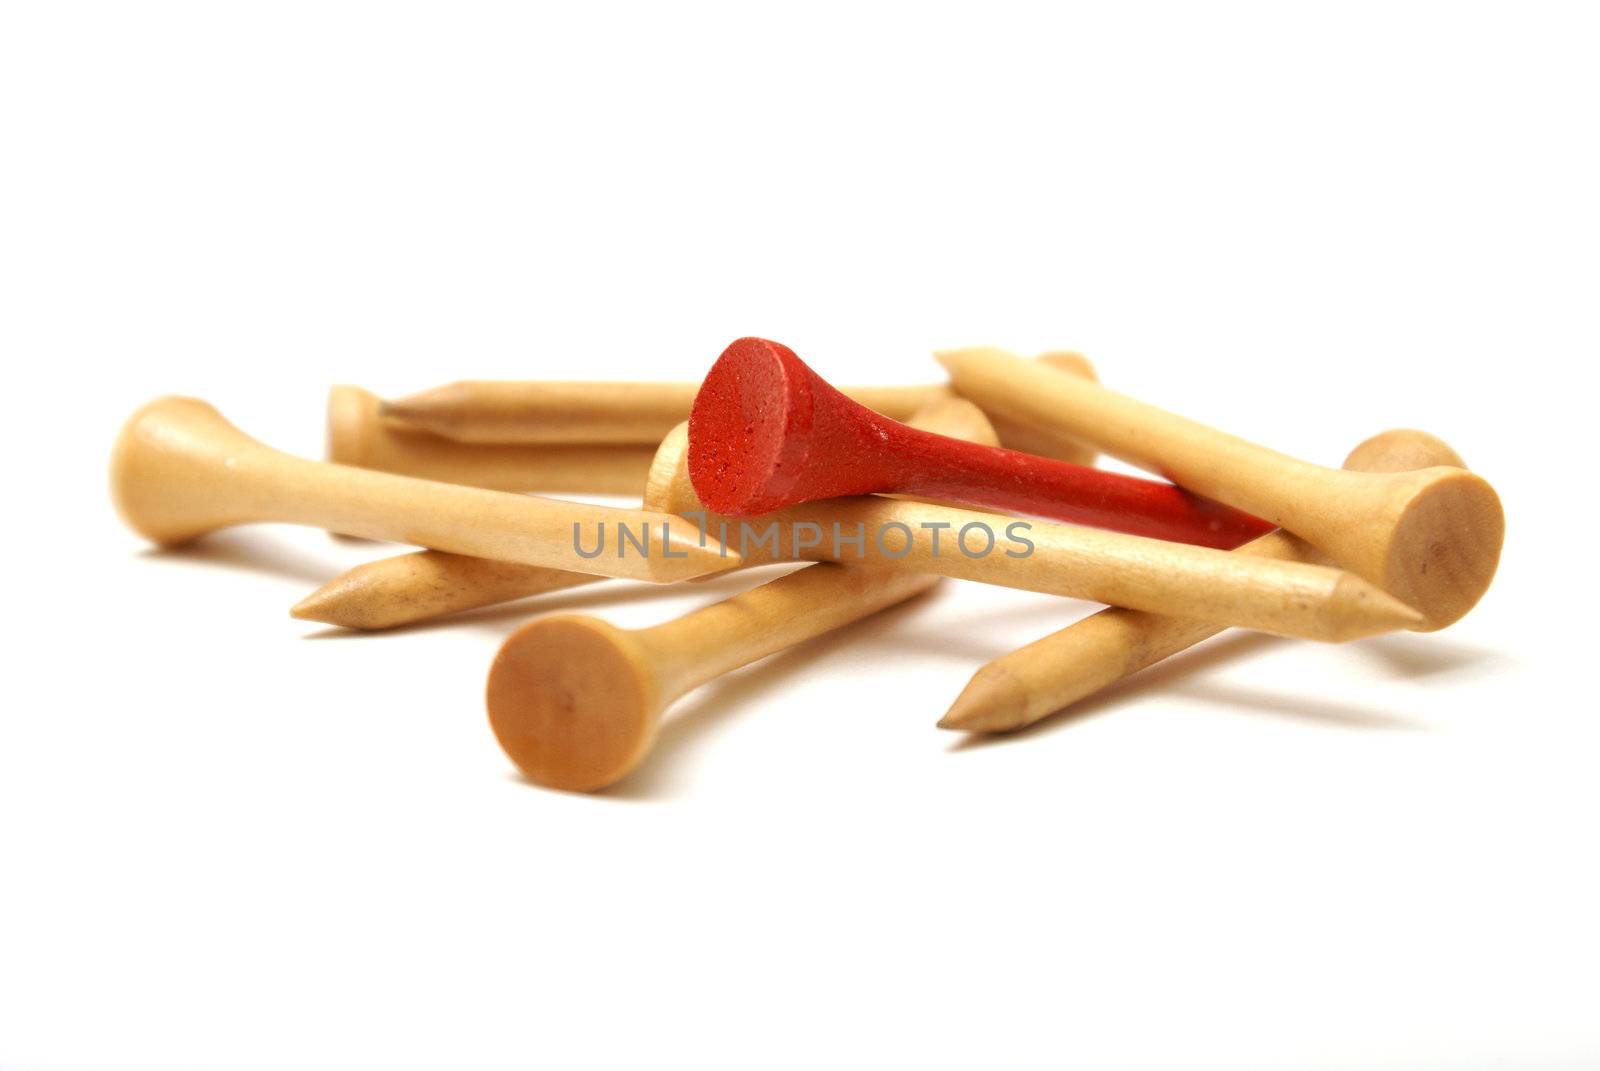 A bunch of golf tees isolated with one red tee in the group.